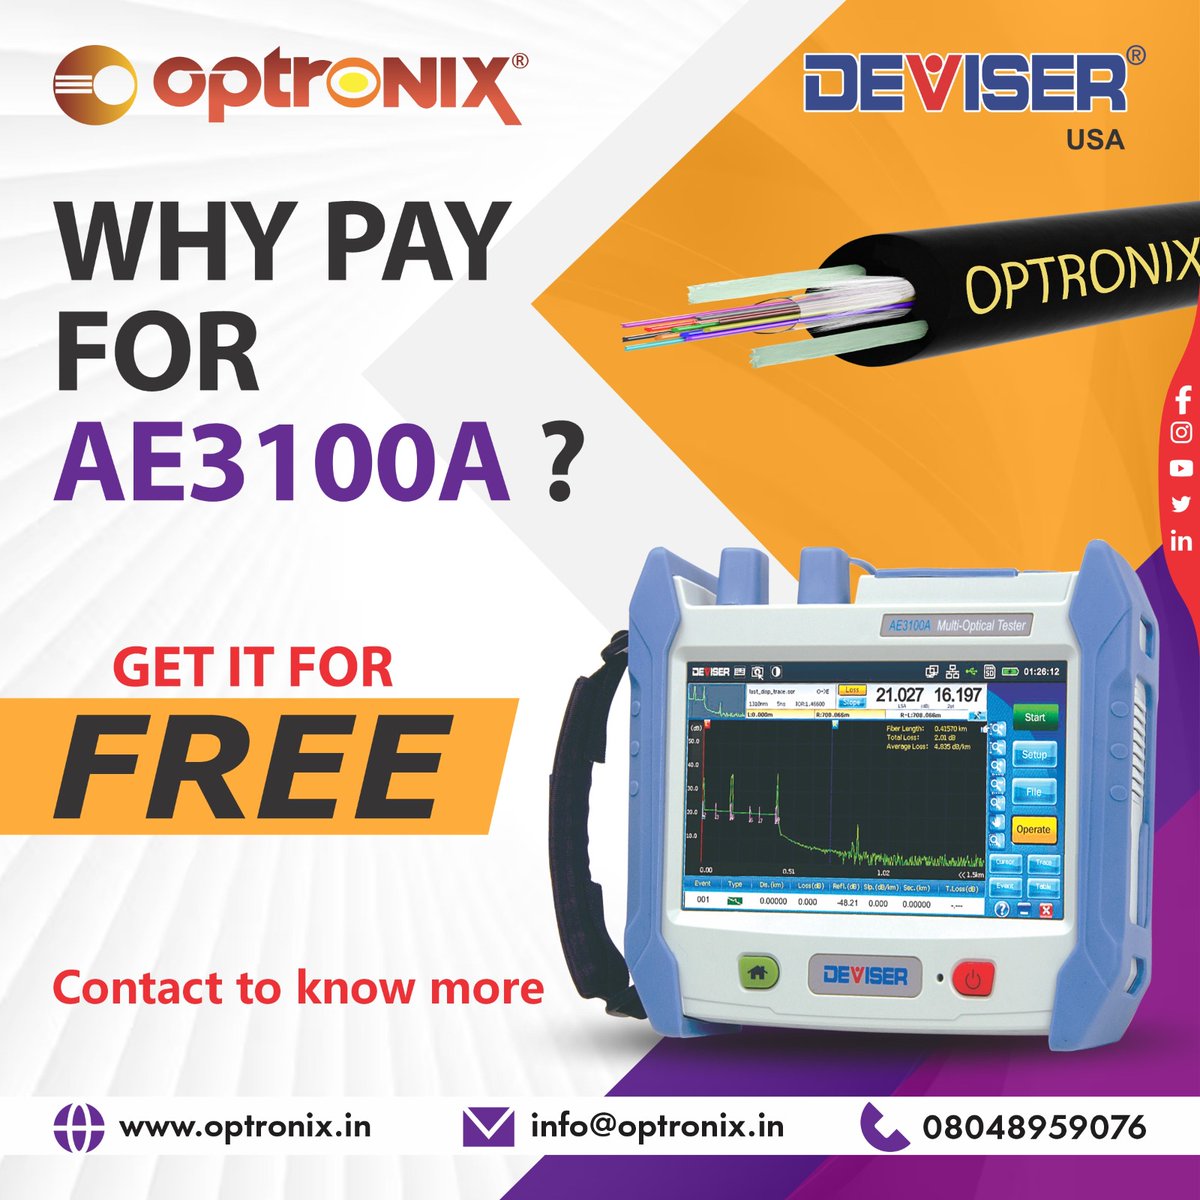 WHY PAY FOR #DEVISER A3100A #OTDR?
.
.
> GET IT FOR FREE
>For Product Info. - optronix.in
.
.
#DiwaliBusinessBoost #OptronixFiberCable #candidoptronix #DiwaliDhamaka #OptronixFiberCable #FestivalOfLights #splicingmachine  #fiberoptic #sumitomo #optronix  #fibertesting